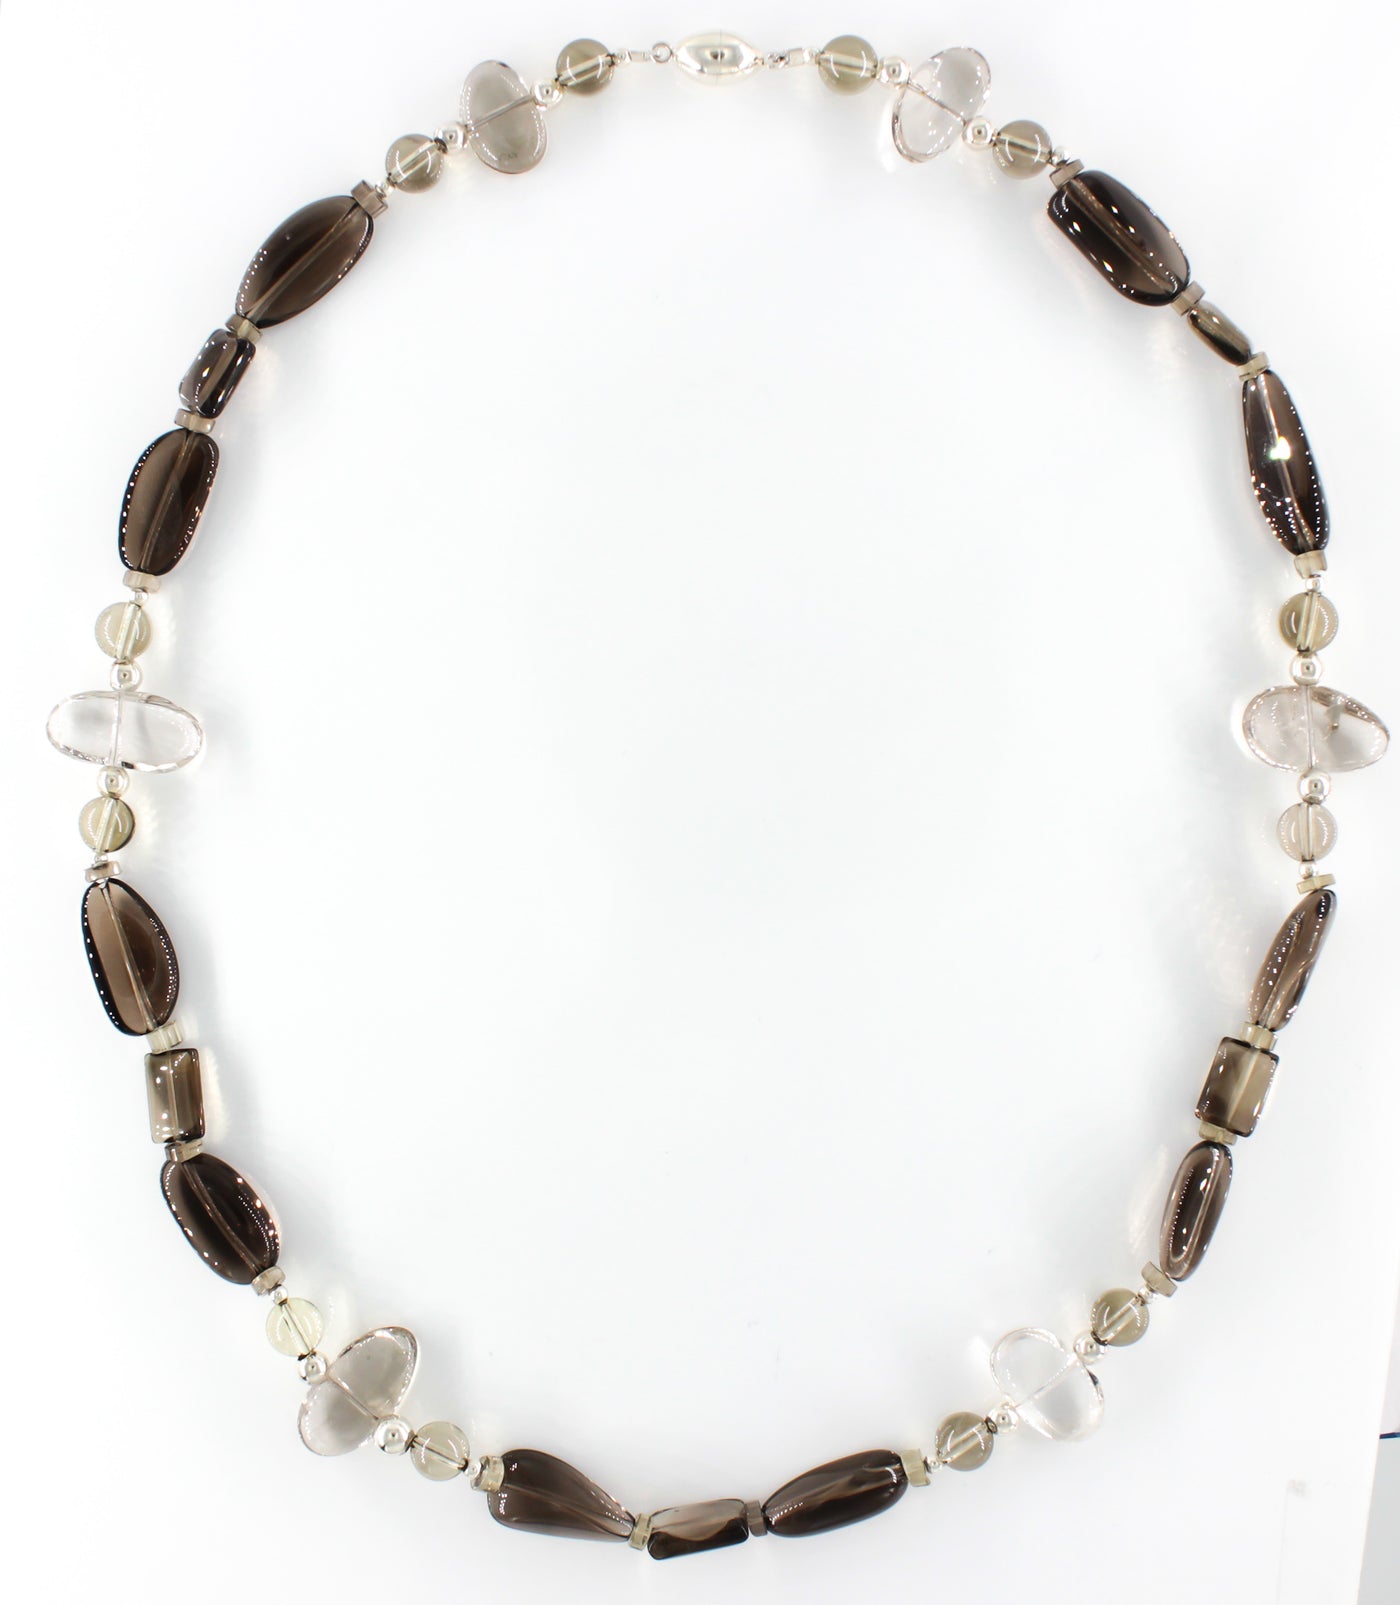 Gem Bead and Sterling Silver Necklace with Sterling Silver Beads